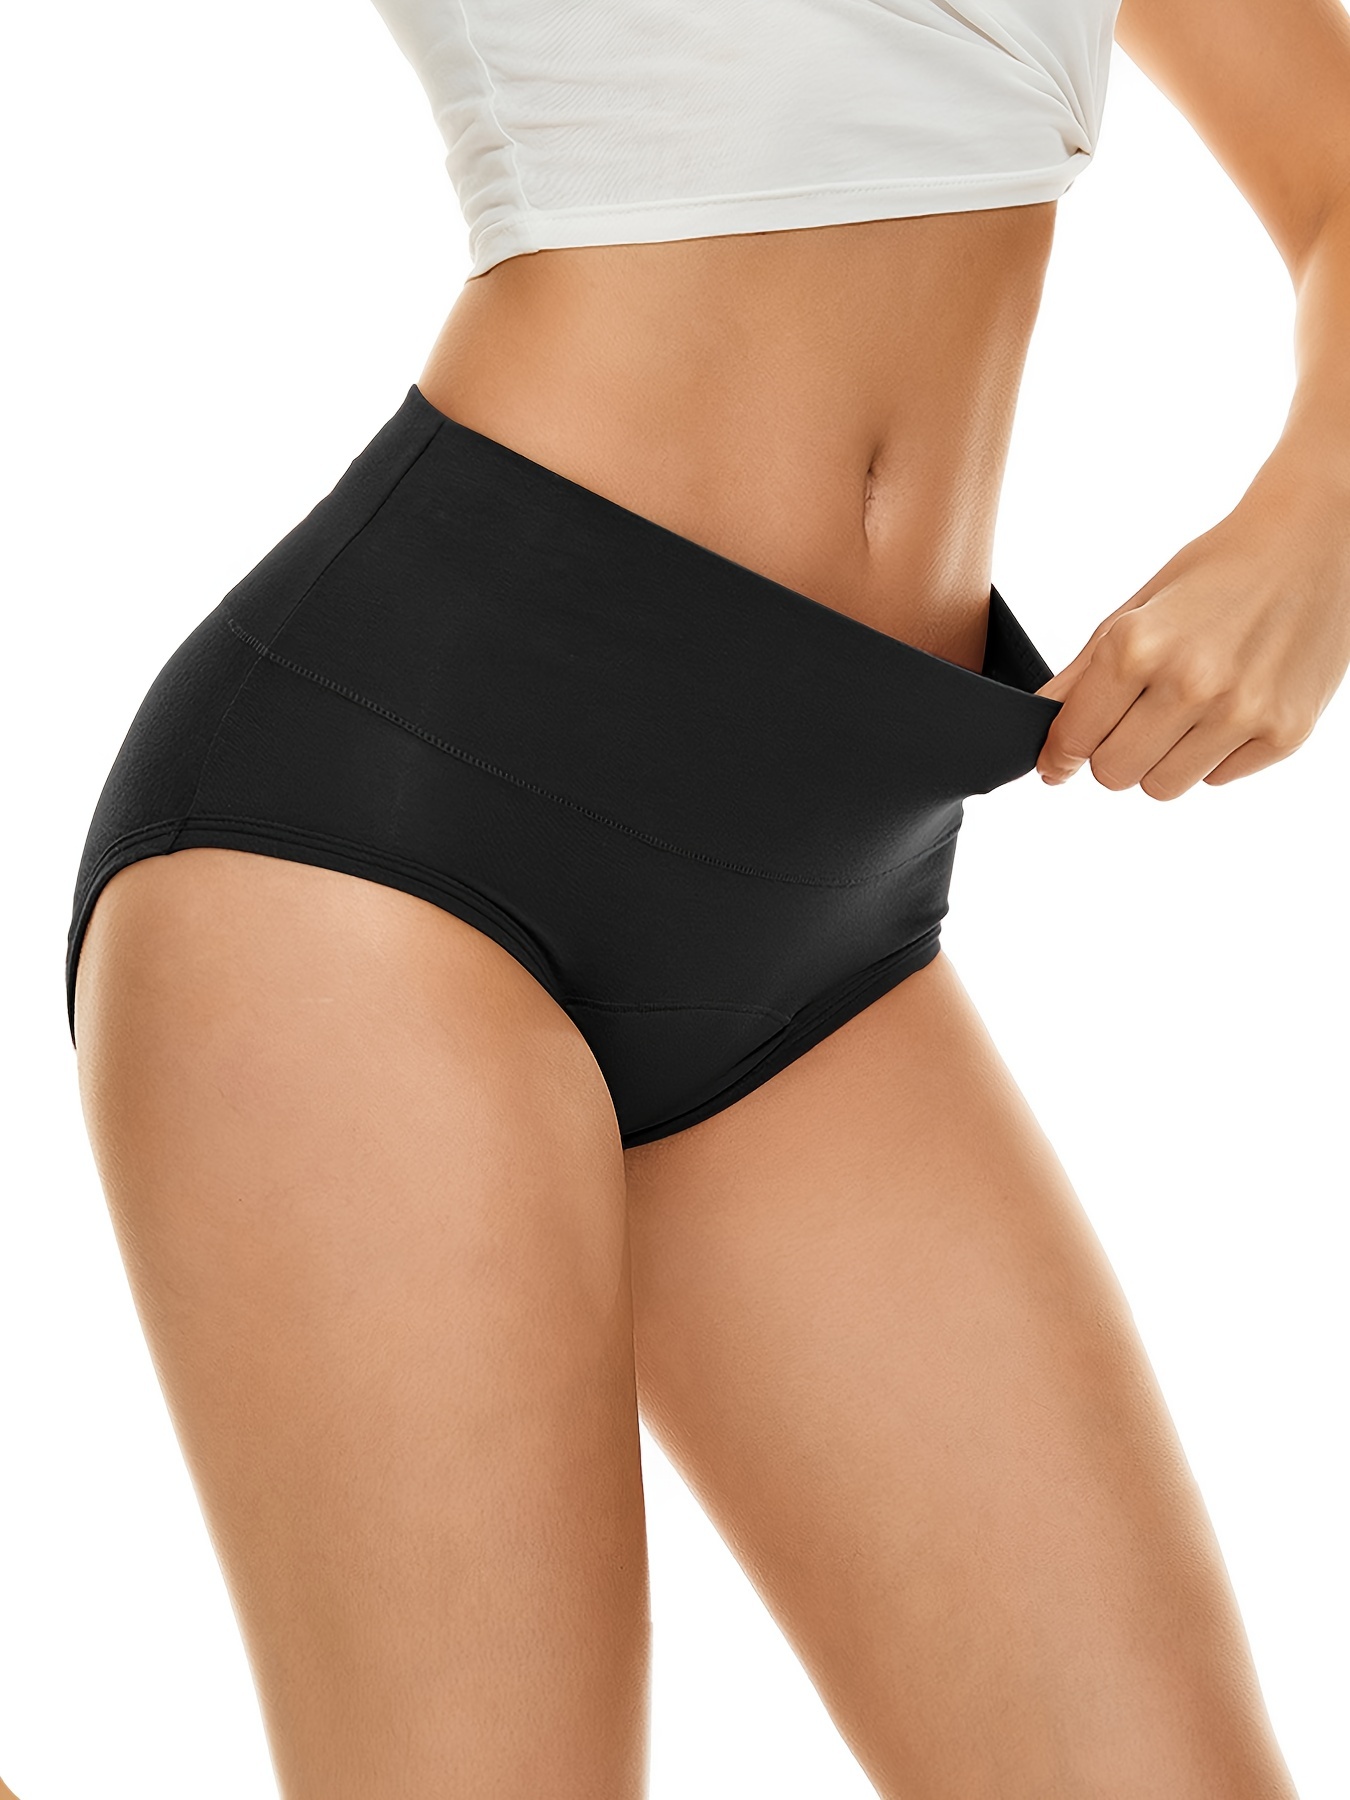 Plus size women's underwear physiological pants with high